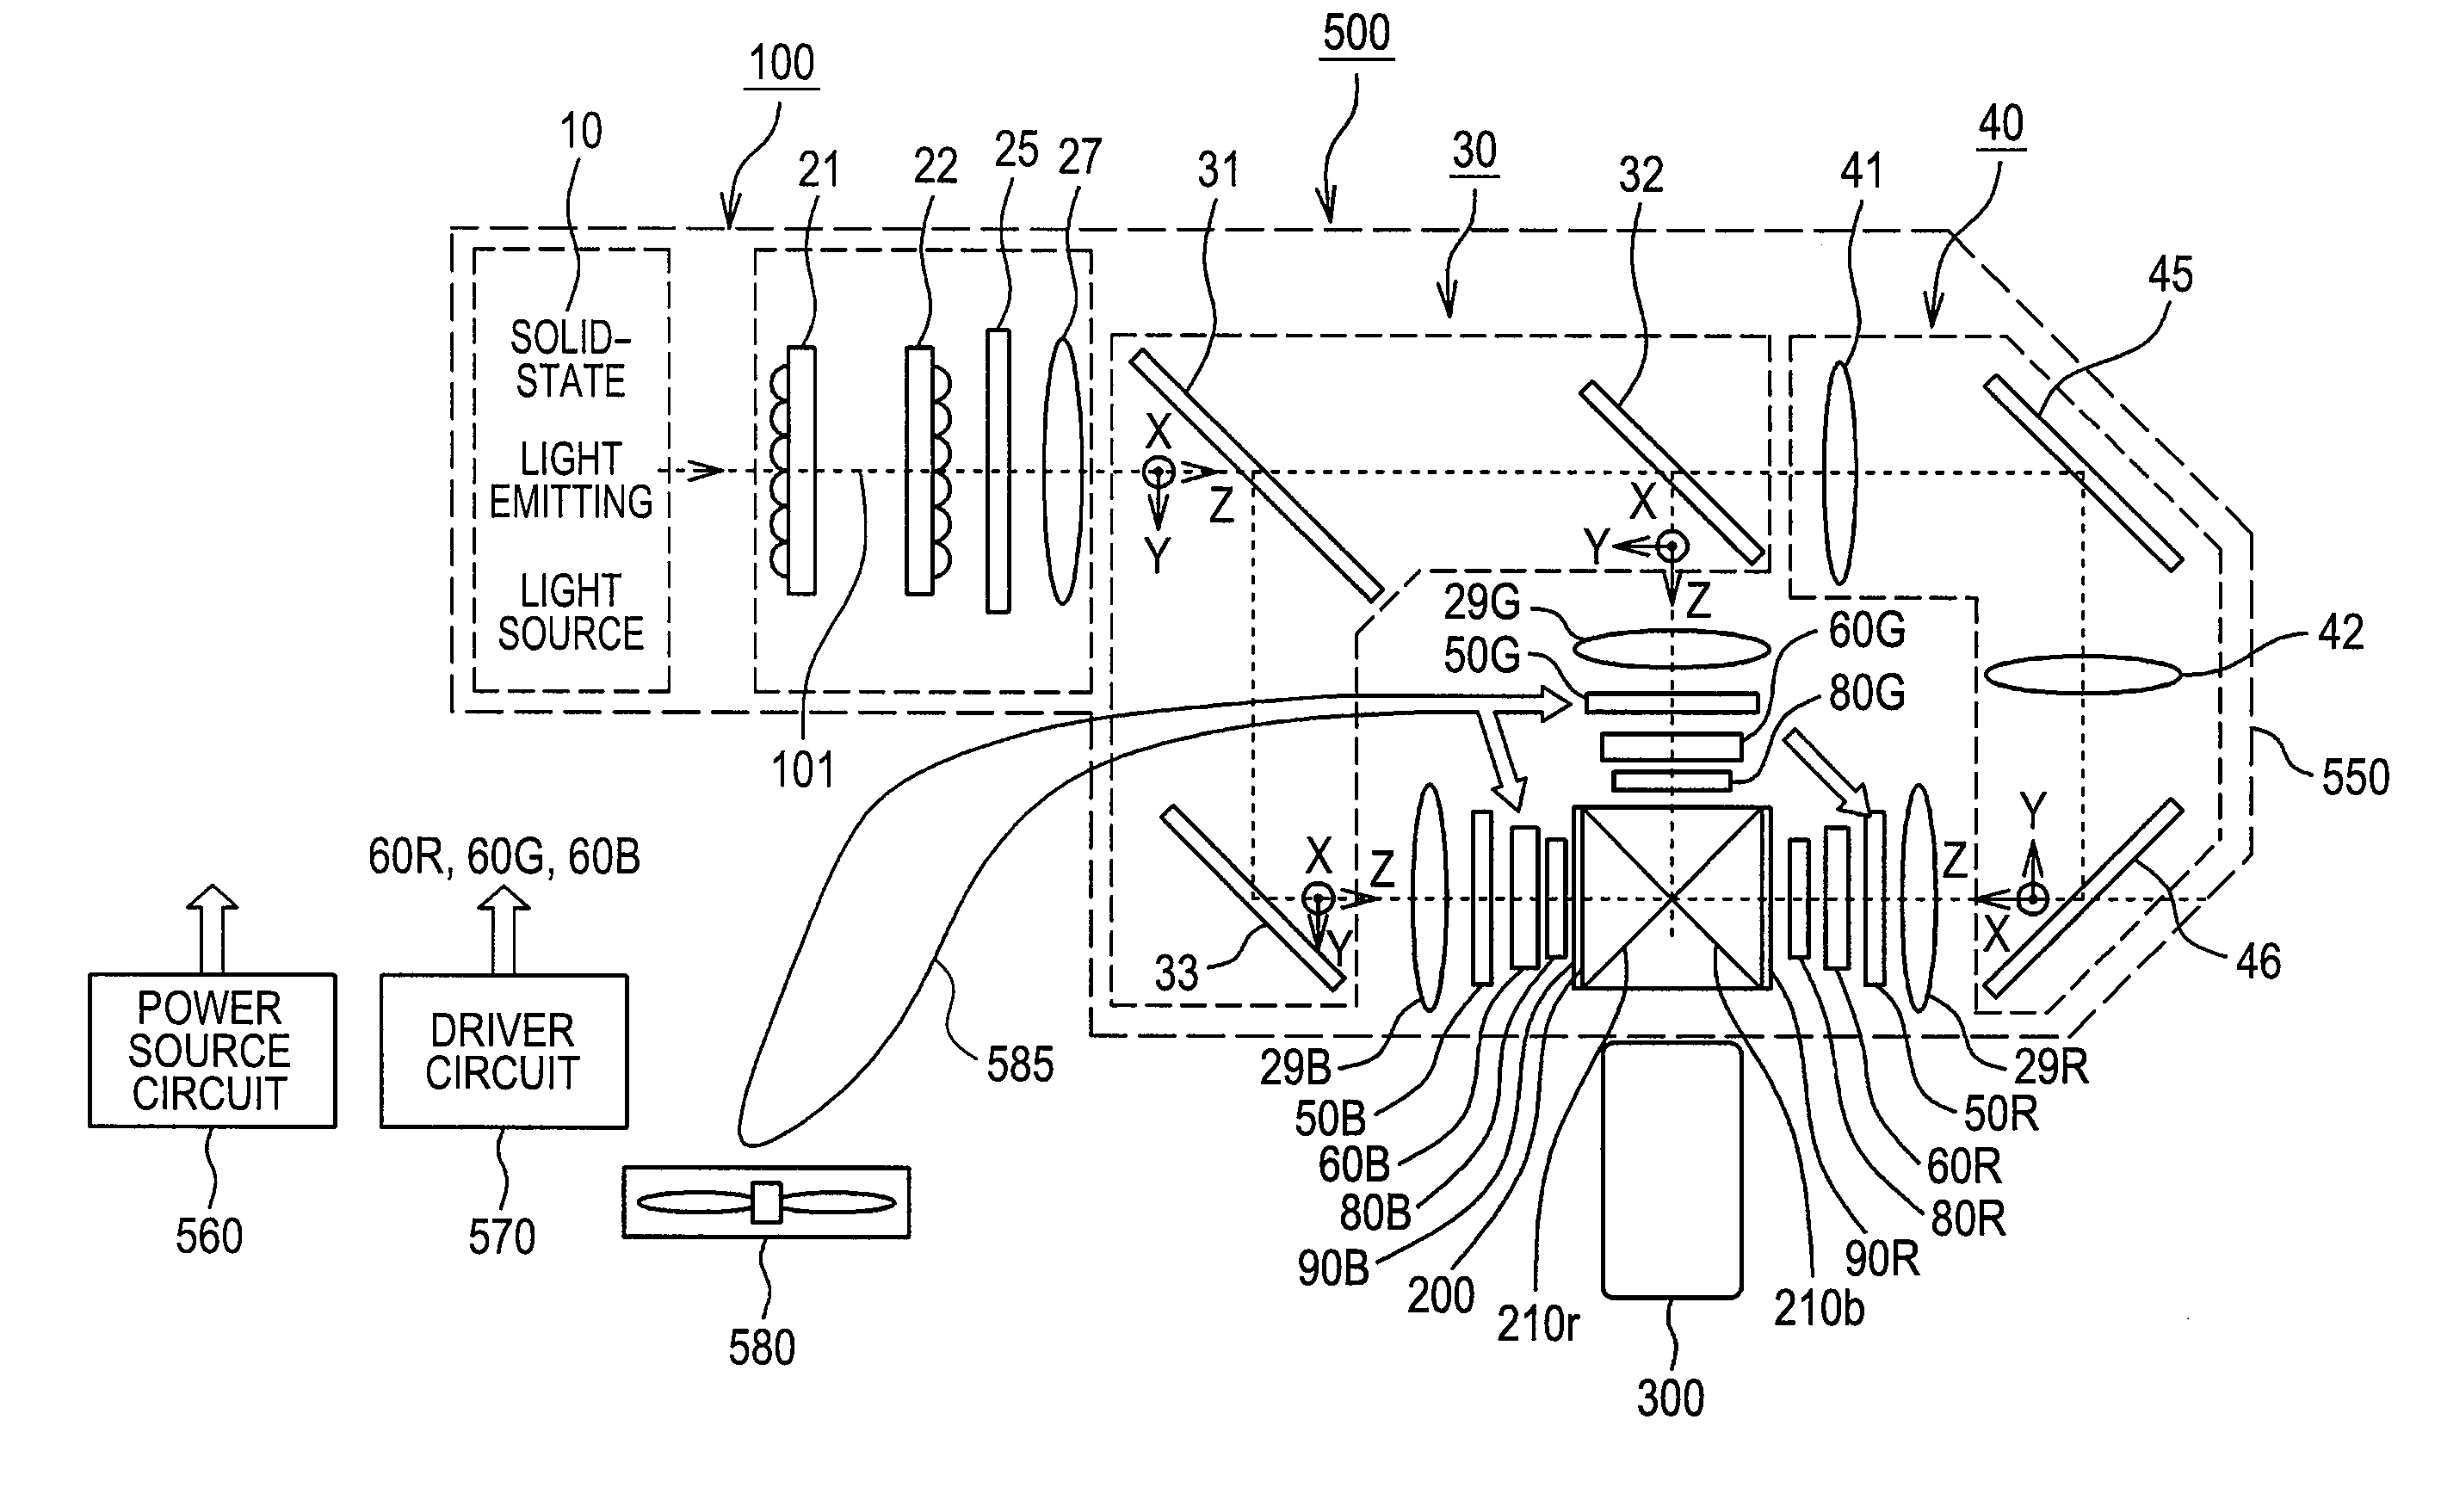 Solid-state light source device